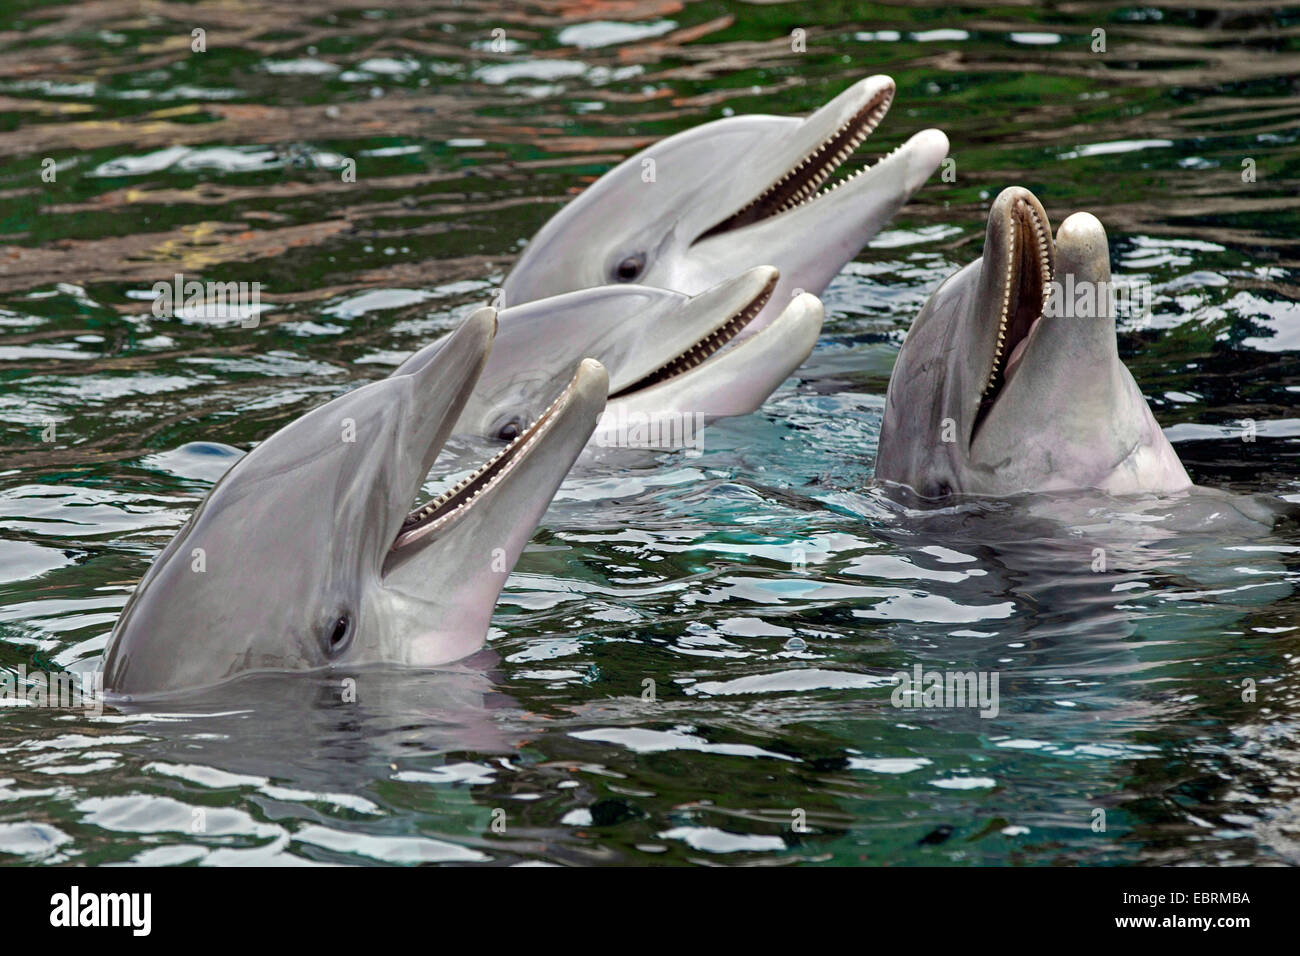 Bottlenosed dolphin, Common bottle-nosed dolphin (Tursiops truncatus), four dolphins looking out of the water Stock Photo